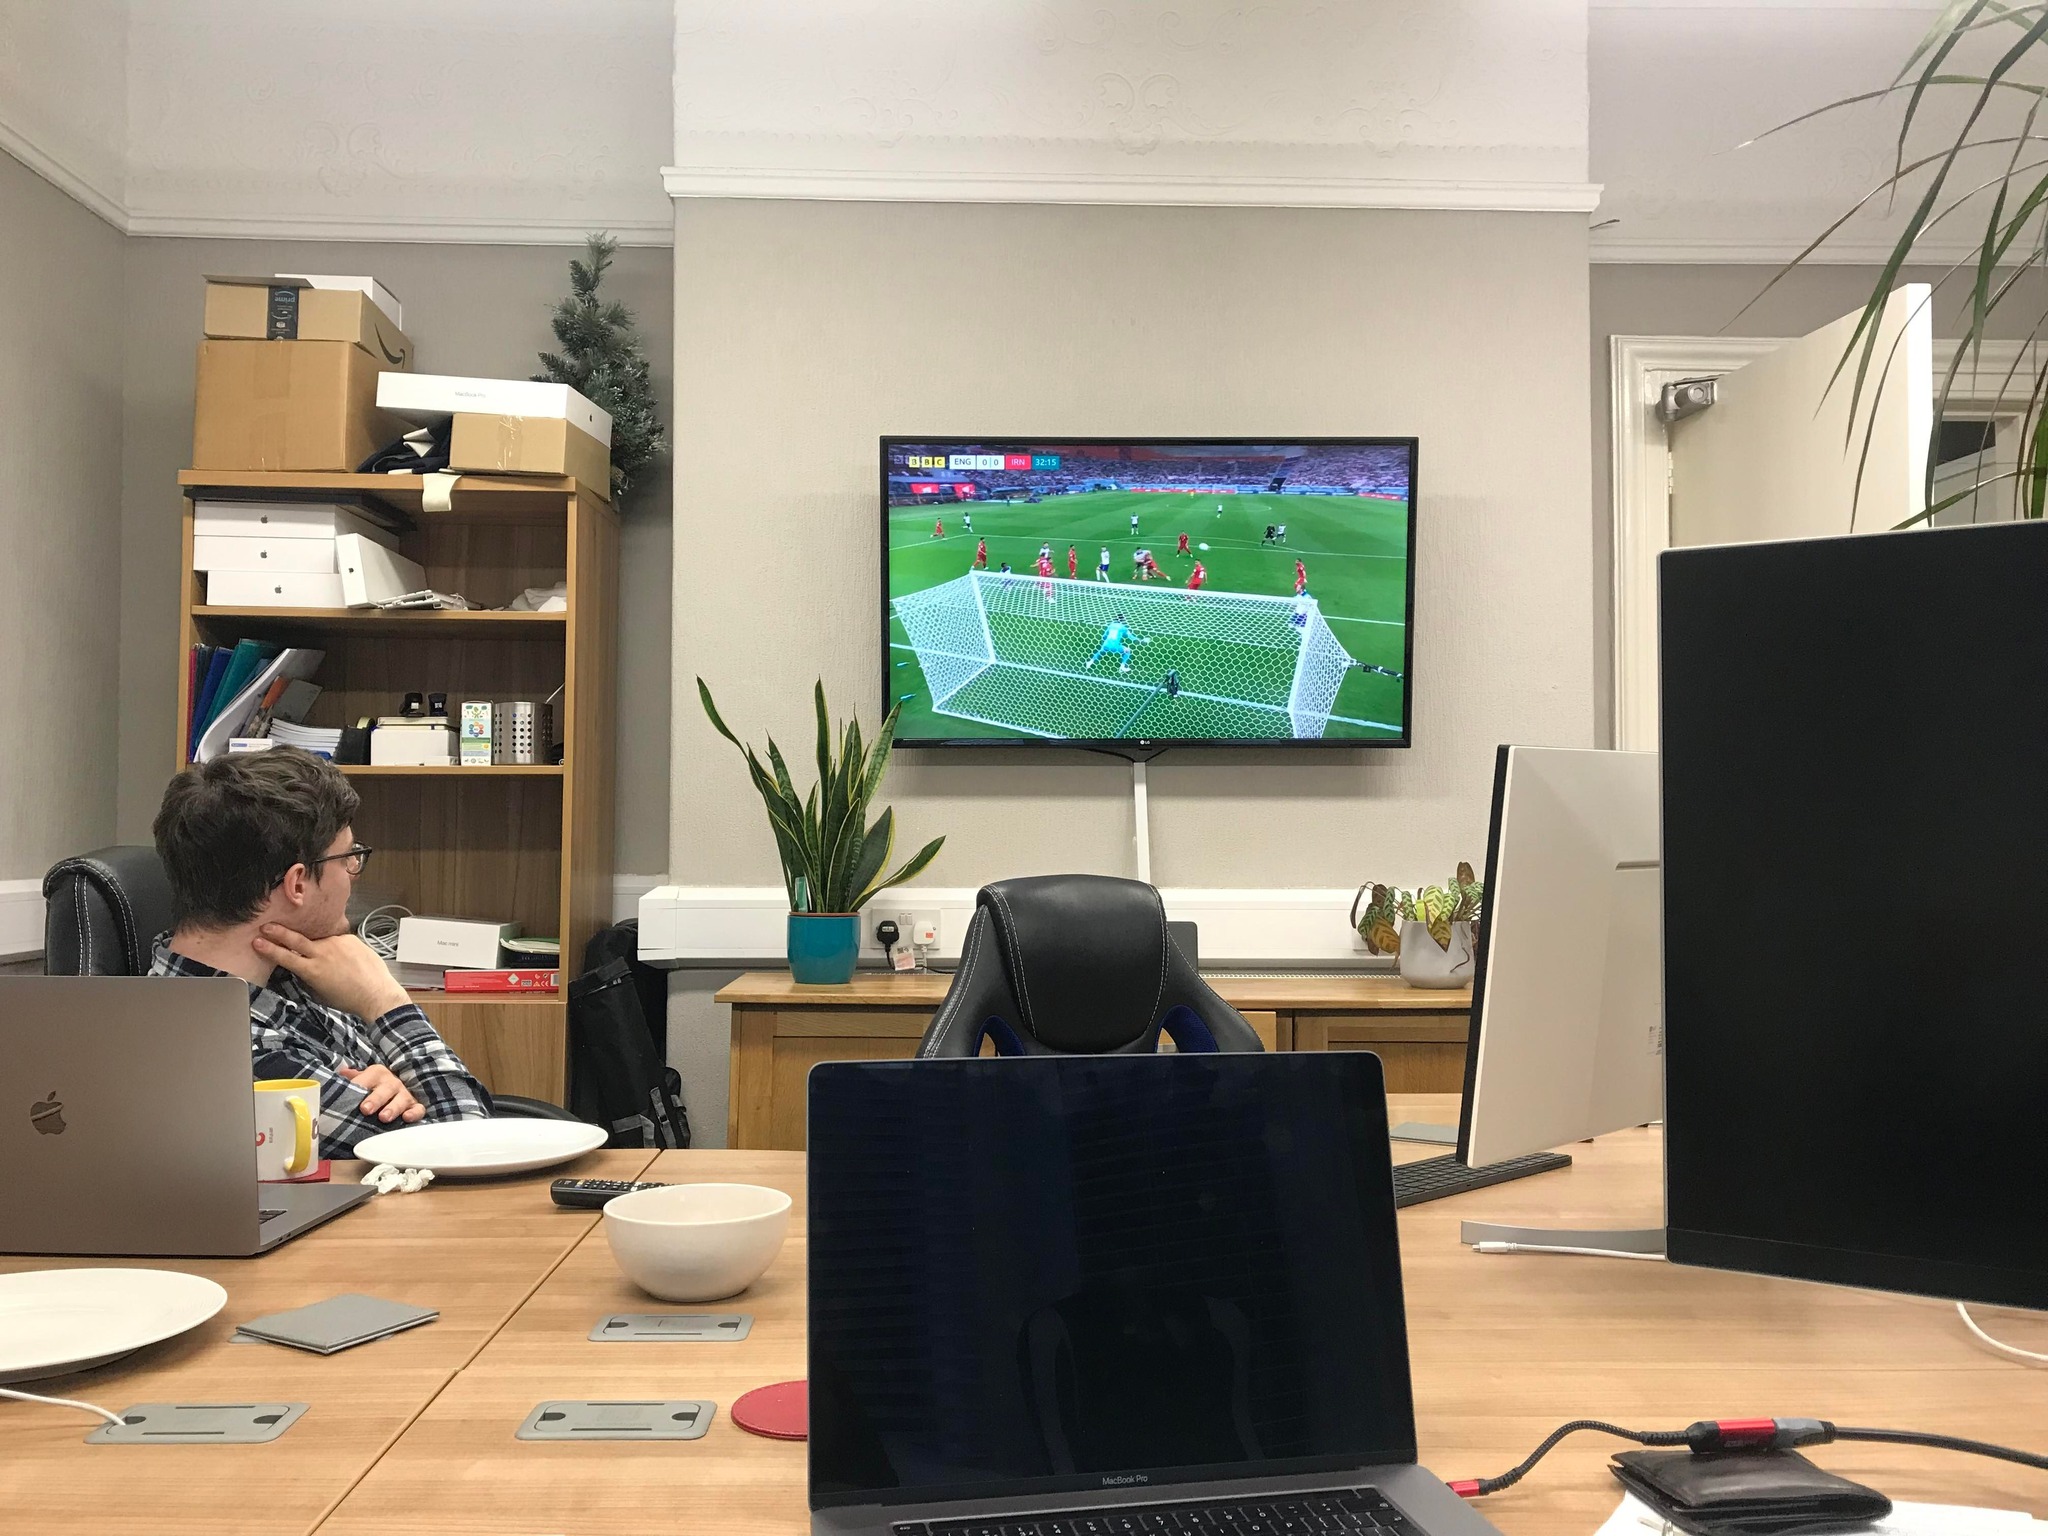 england vs iran at the football world cup on a tv in an office